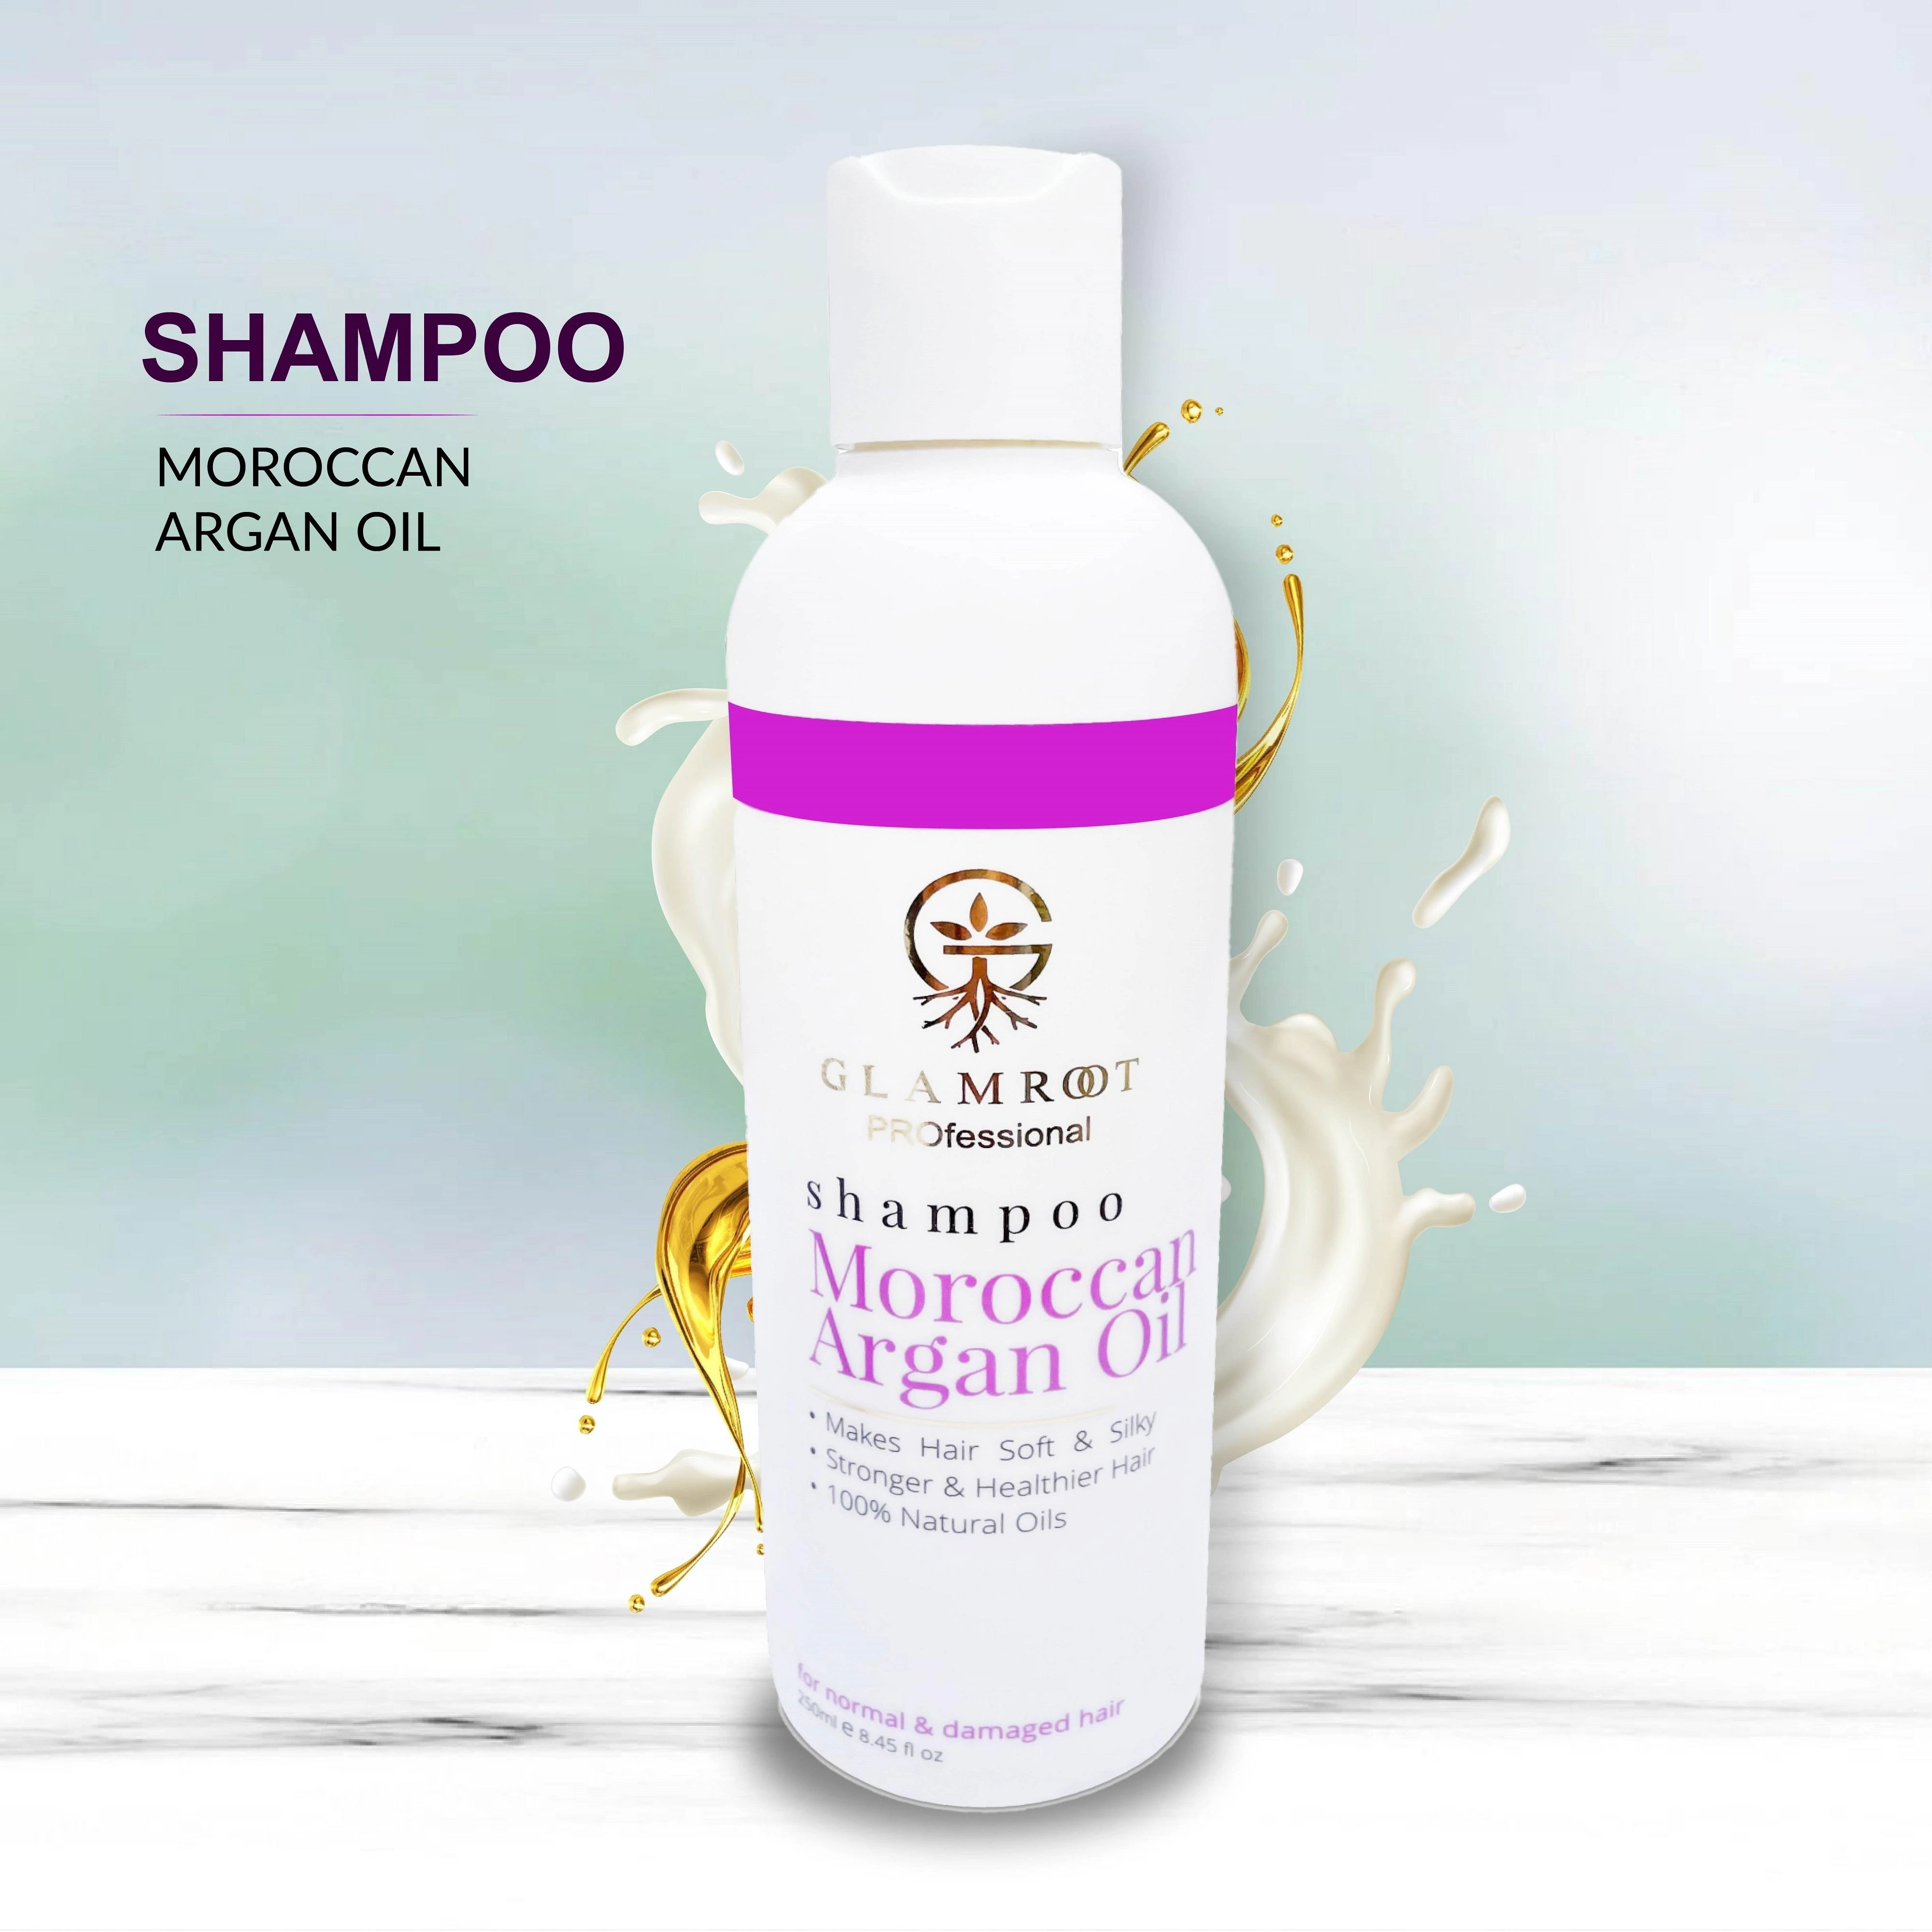 GLAMROOT Moroccan Argan Oil Shampoo for Smooth and Silky Hair 250 ml -  JioMart